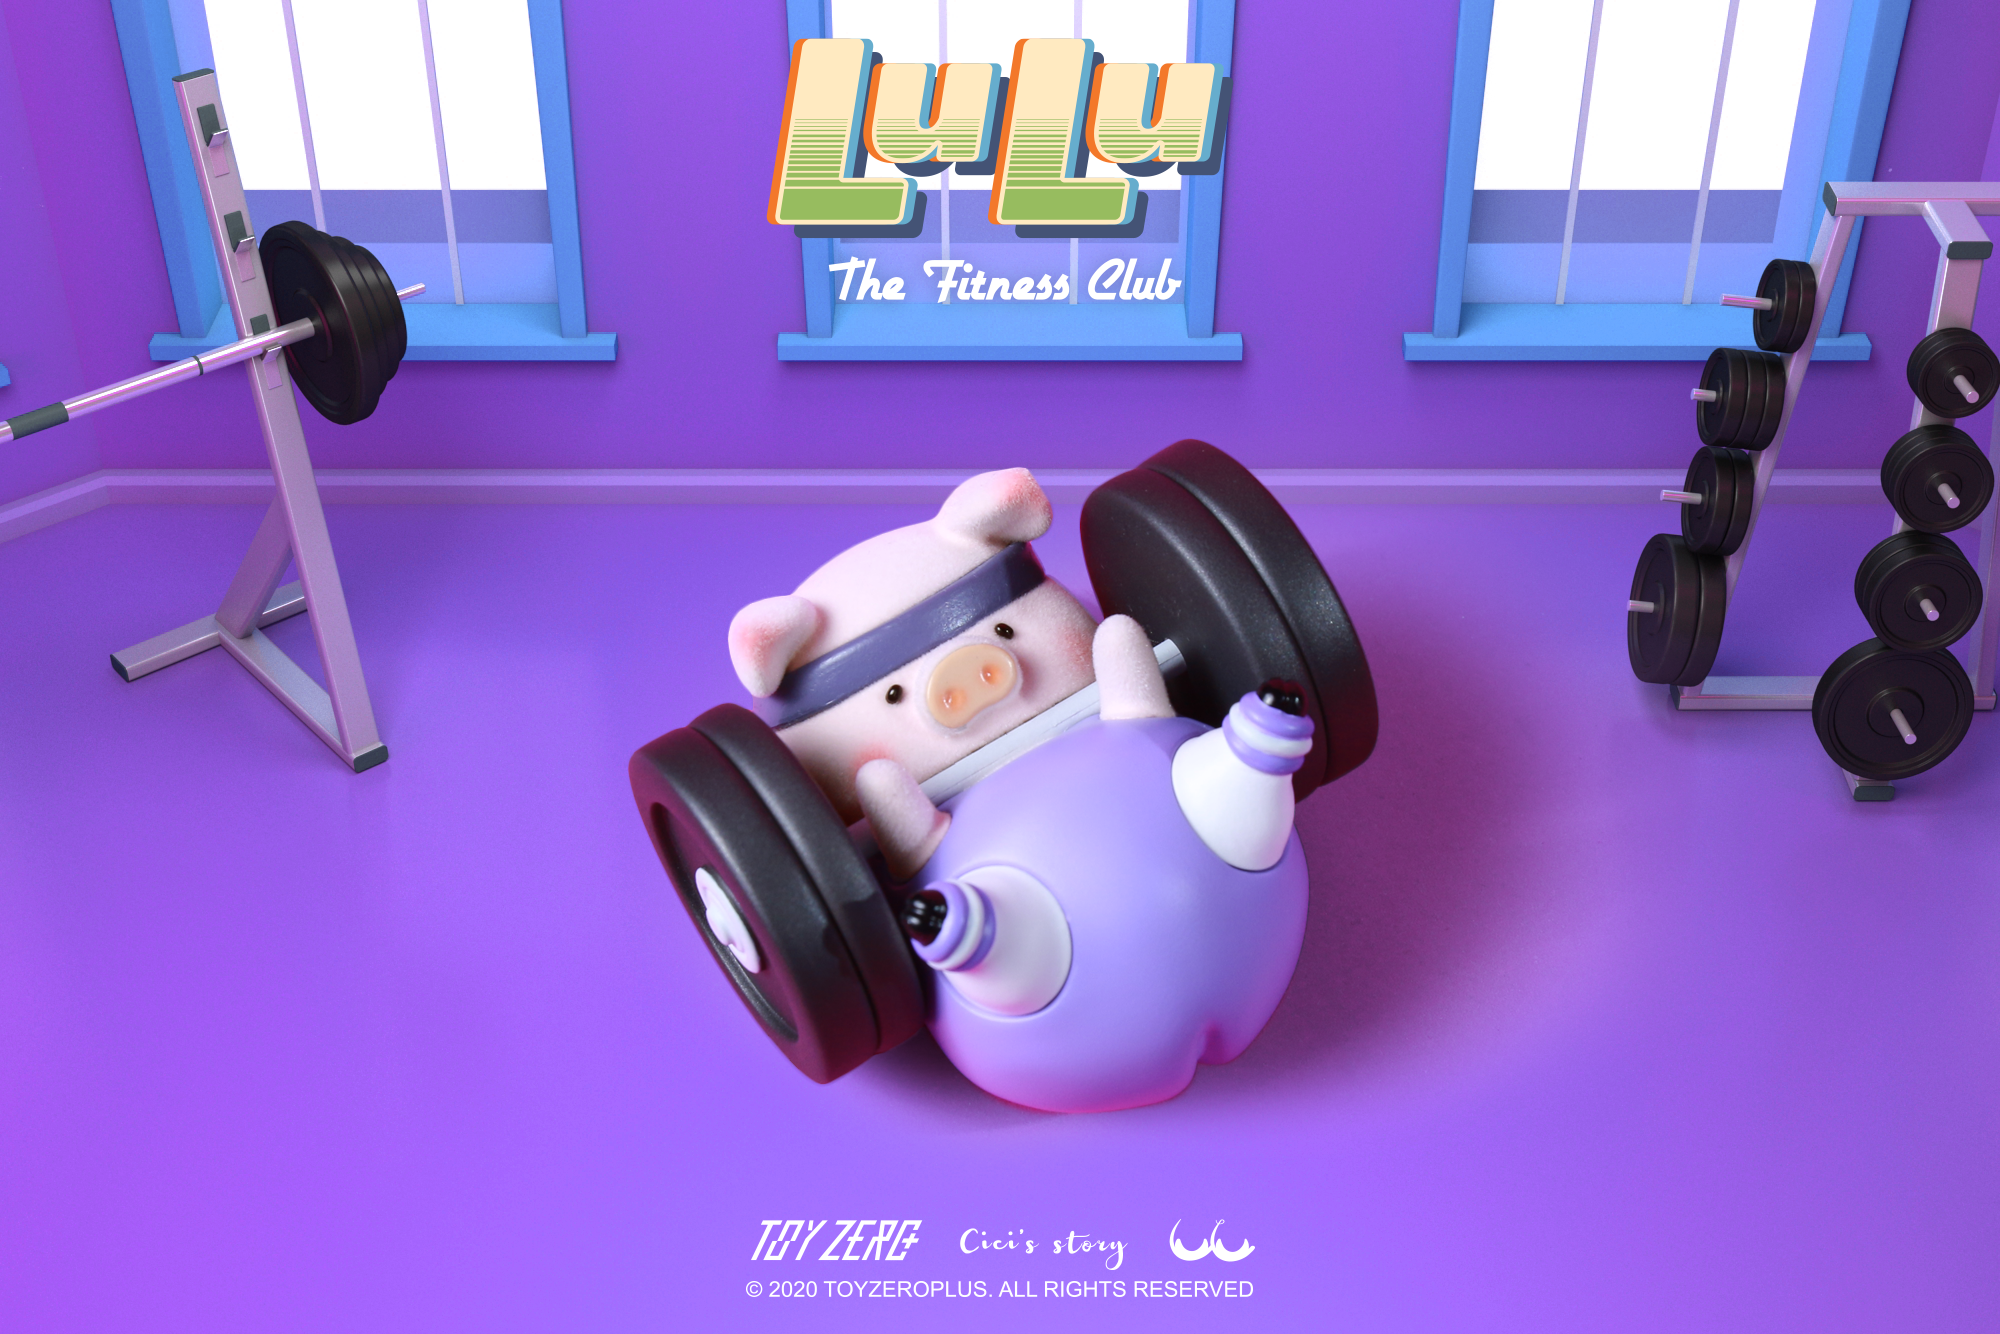 LULU the piggy - The Fitness Club Series Blind Box Set by Cici’s Story